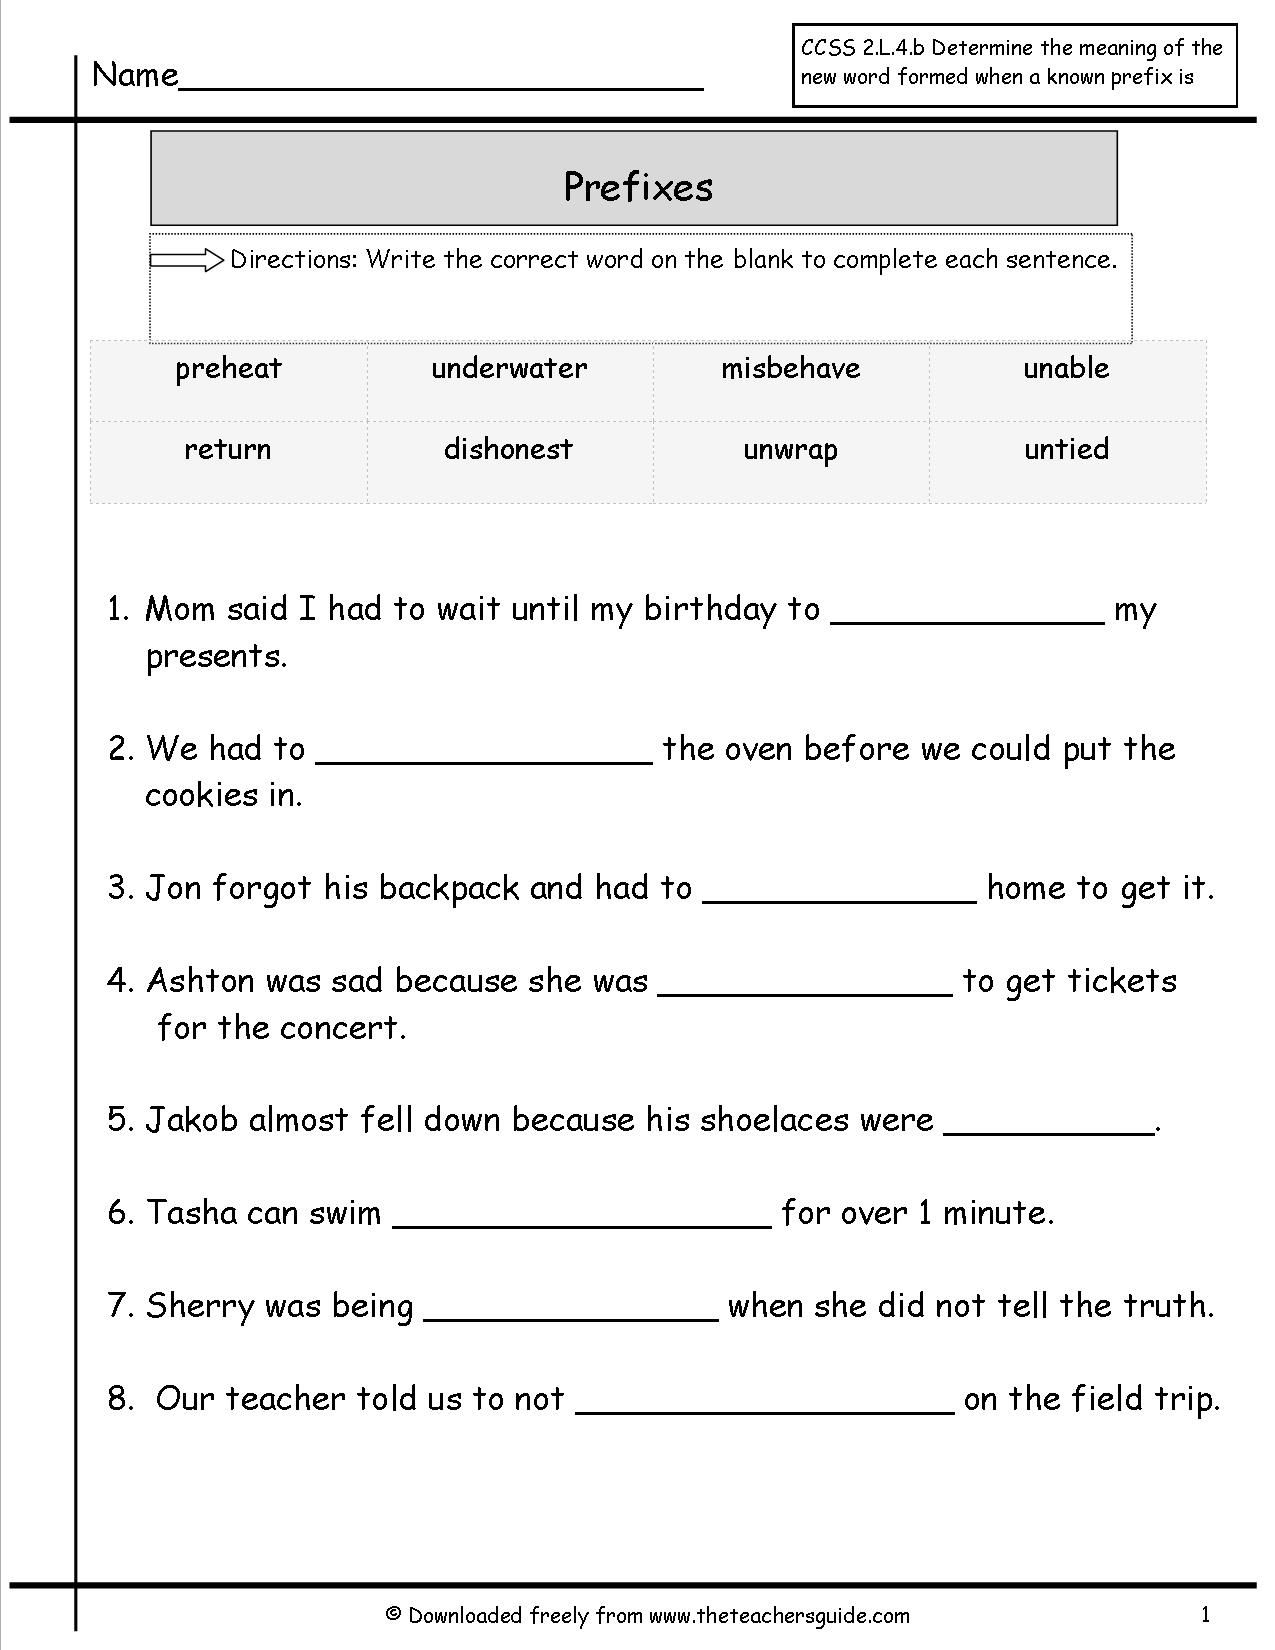 Prefixes And Suffixes Worksheets For Grade 4